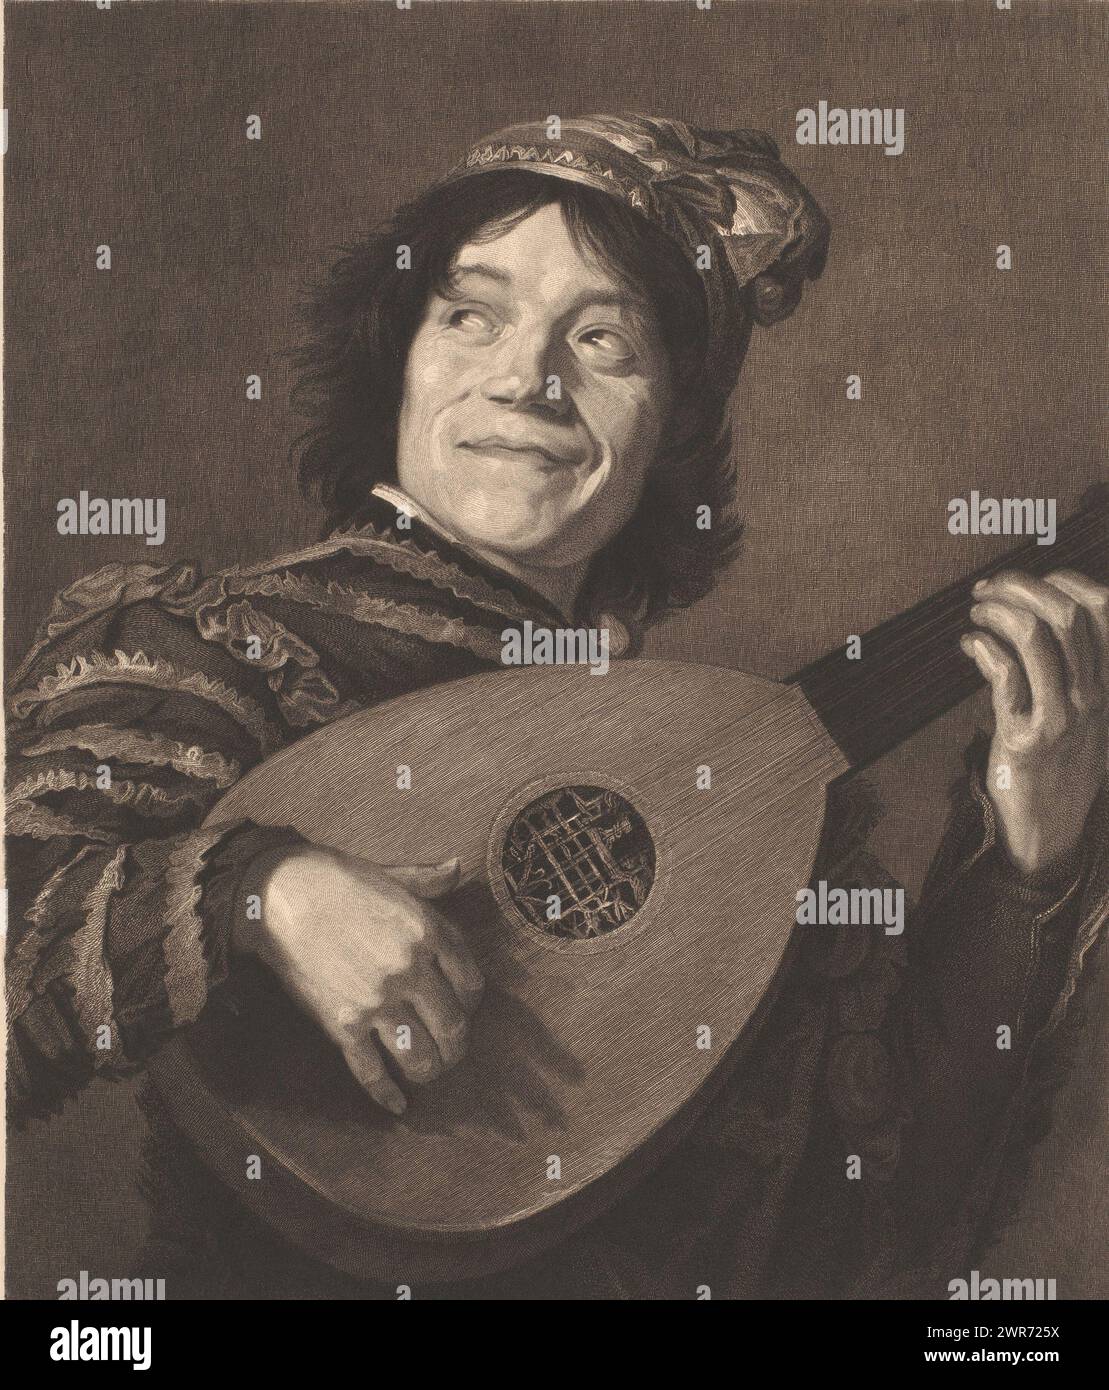 Lute player, with a man's head in the right margin., print maker: Rudolf Stang, after painting by: Frans Hals, 1841 - 1891, paper, etching, height 474 mm × width 391 mm, print Stock Photo